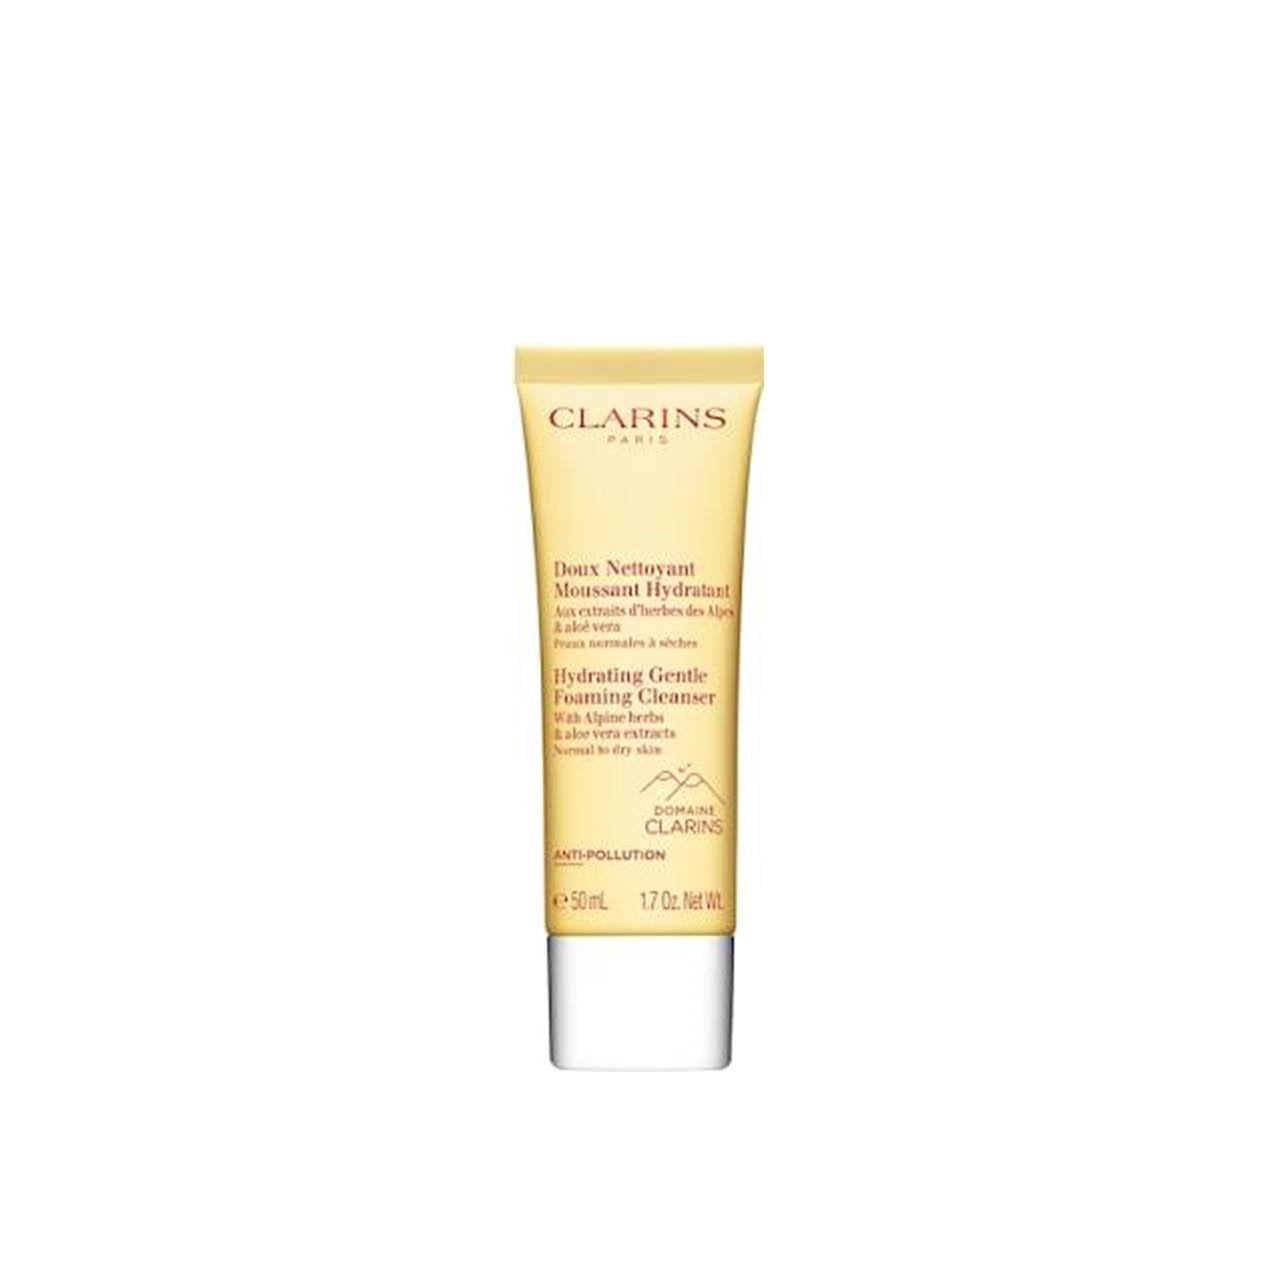 Clarins Hydrating Gentle Foaming Cleanser 50ml